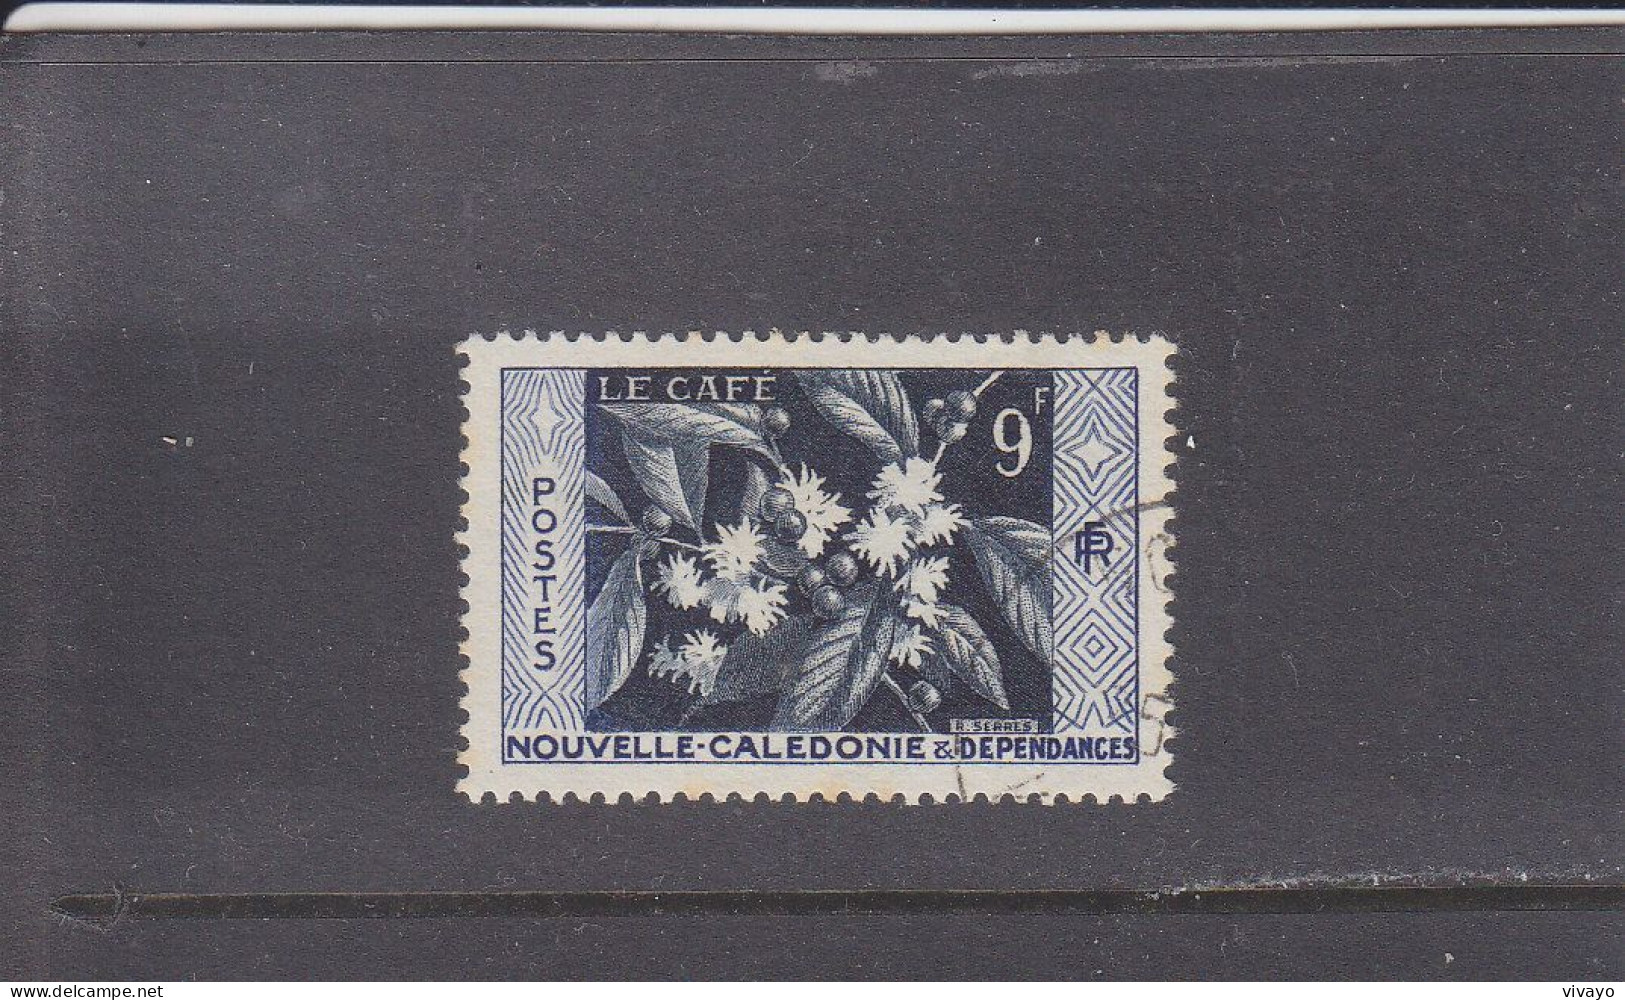 NOUVELLE CALEDONIE - O / FINE CANCELLED - 1955 - COFFEE PLANT - Yv. 286 -  Mi. 358 - Usados